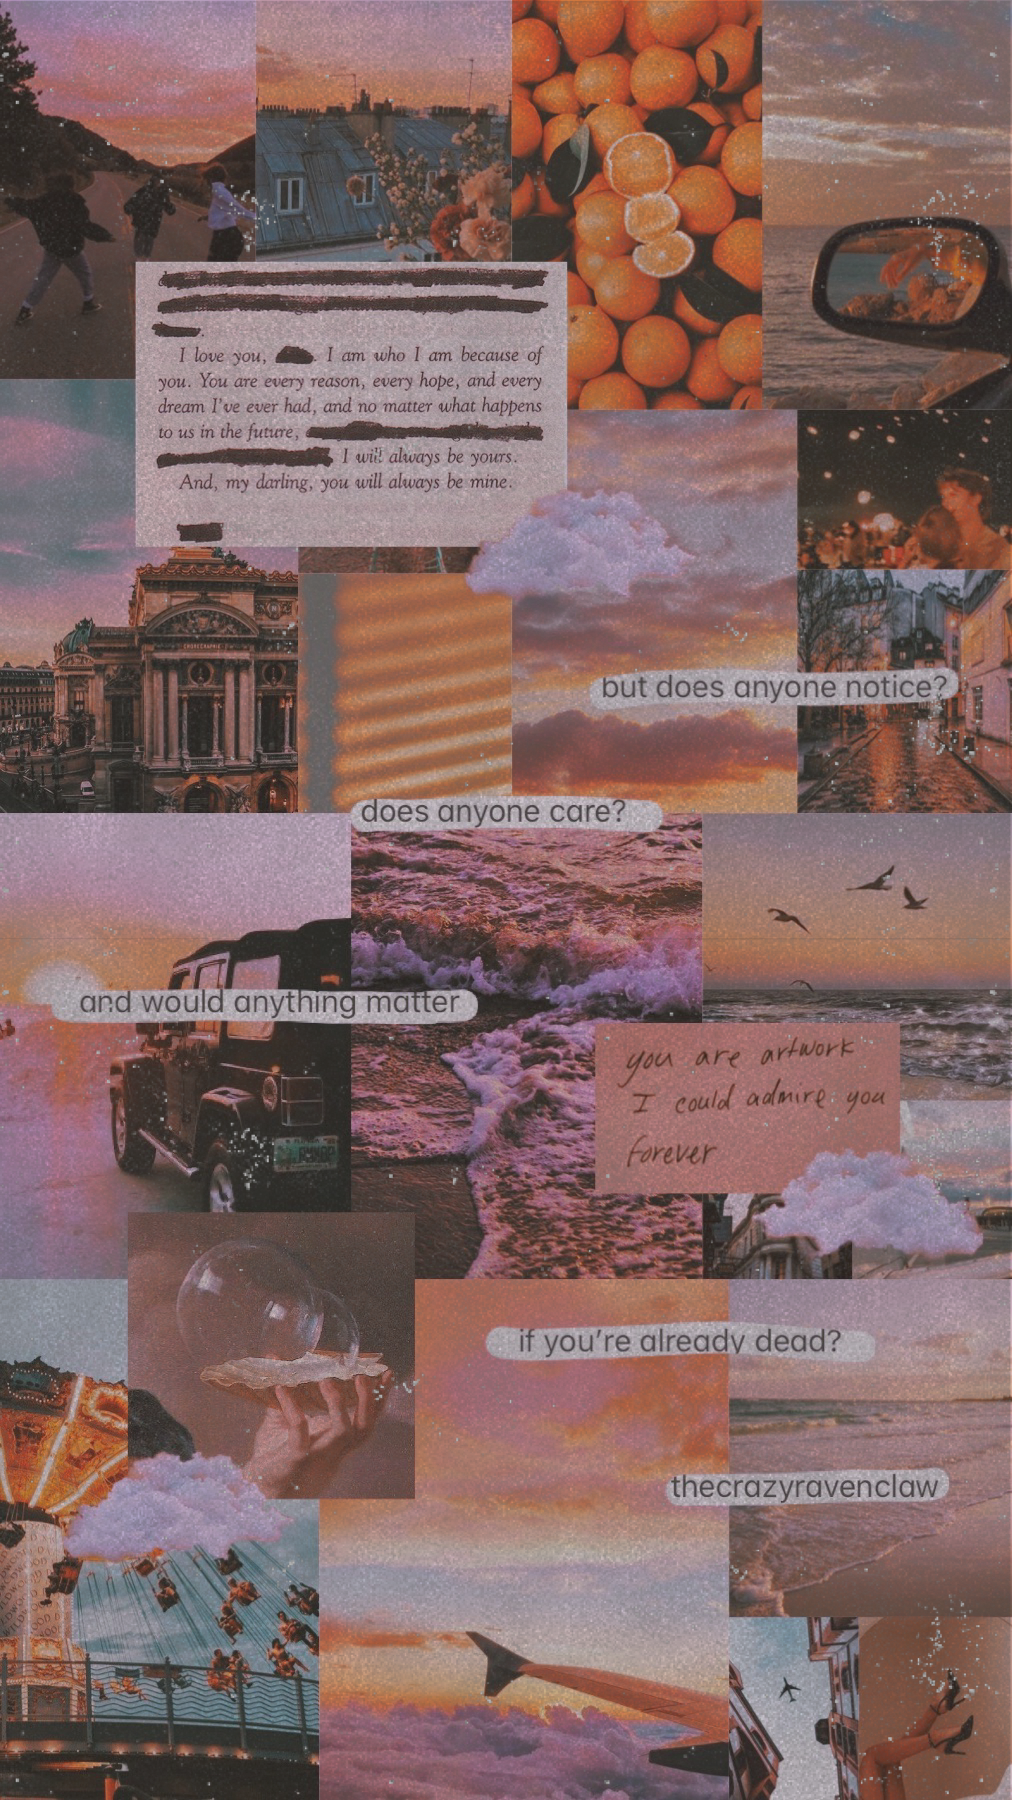 early sunsets over monroeville // my chemical romance
haha you thought i was done with mcr collages HAHHAAHA YOU THOUGHT anyways thinking about reviving my extras🤔 comments! 